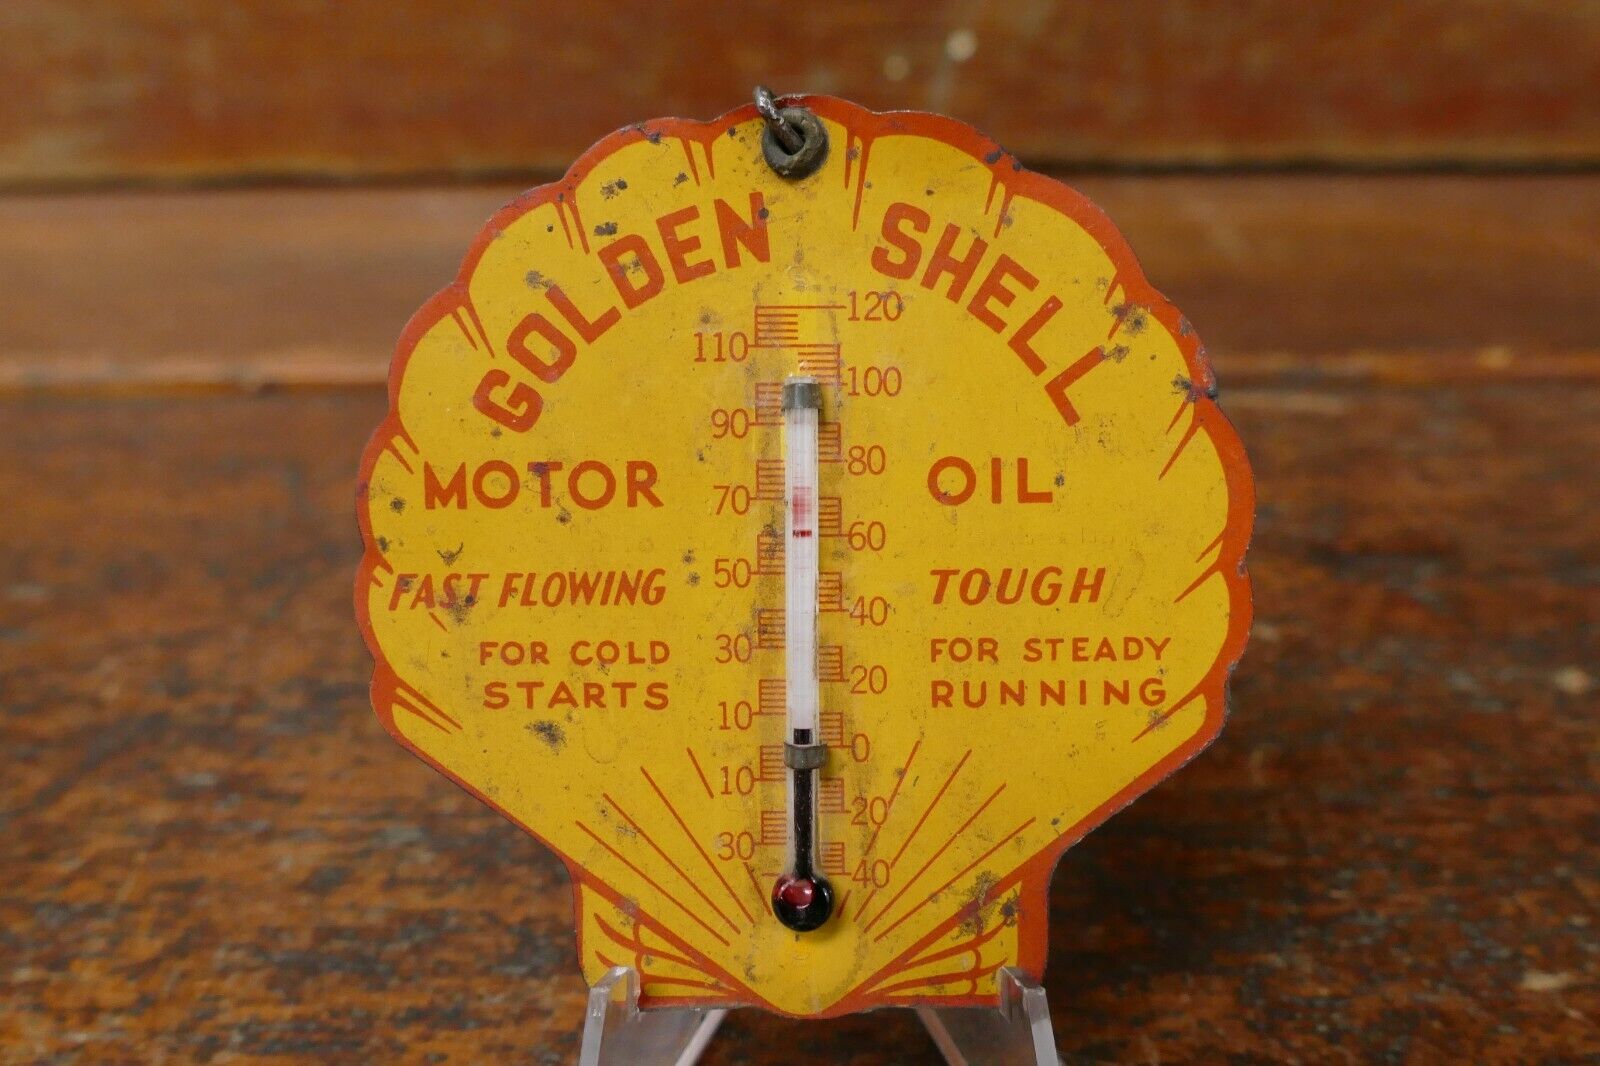 RARE Vintage 1930s Original Golden Shell Motor Oil Clamshell Thermometer Sign